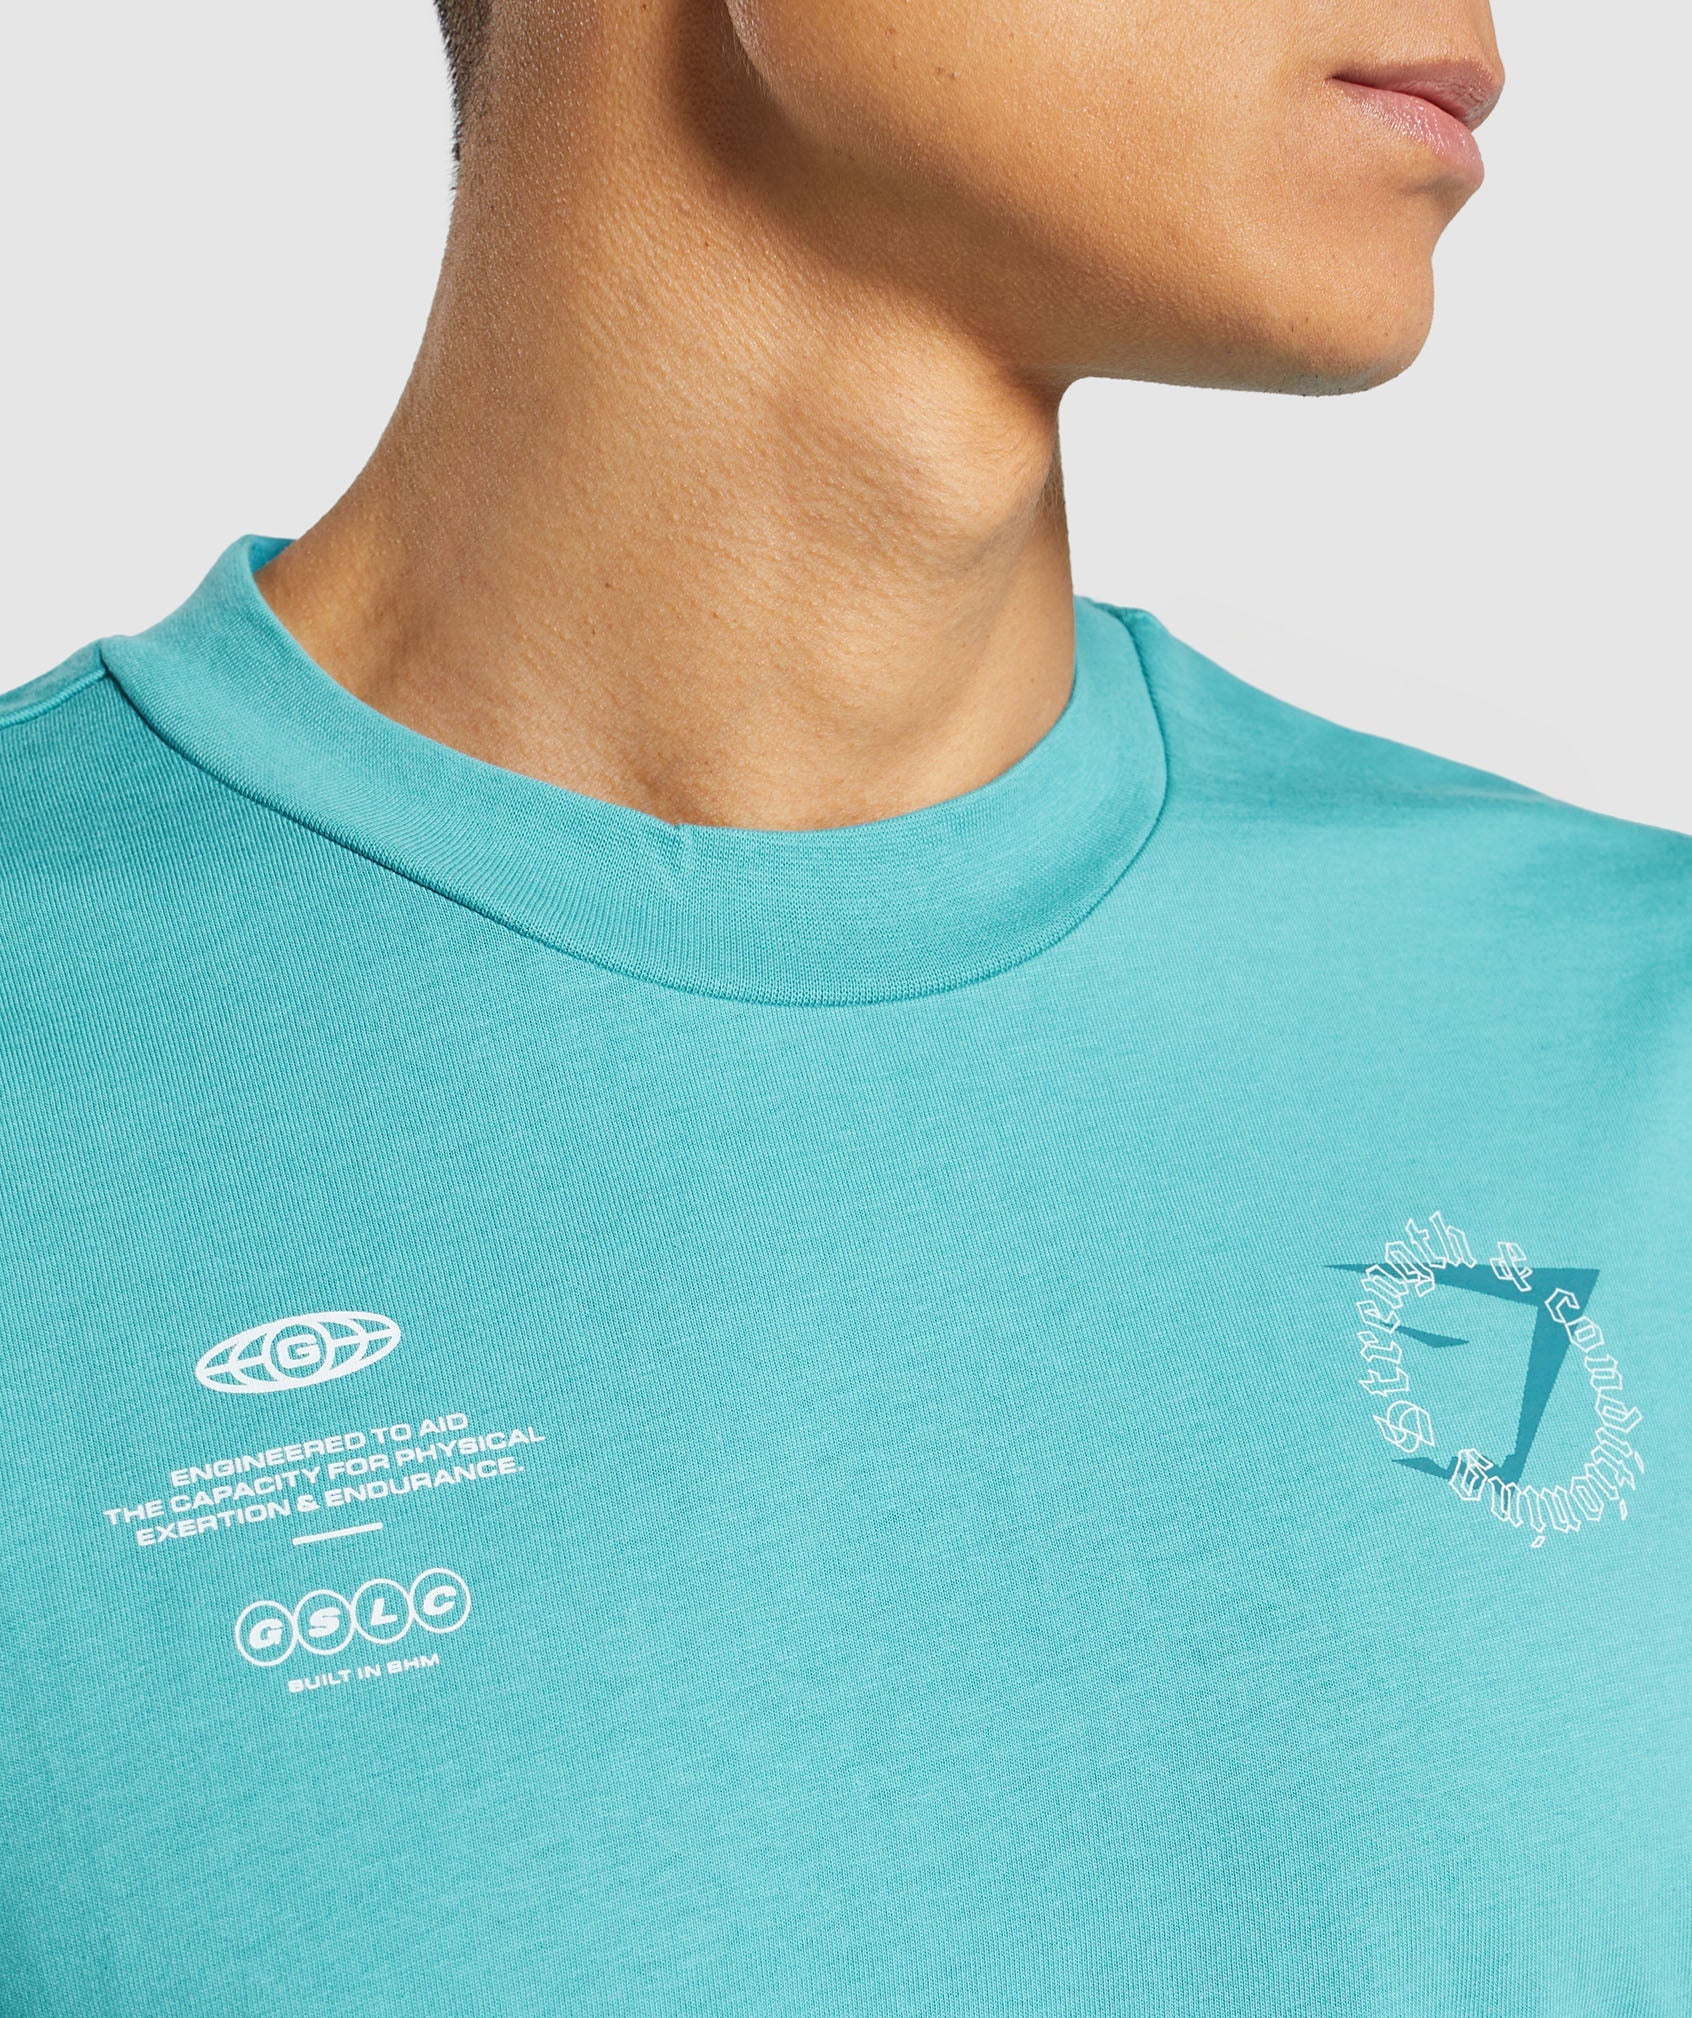 Strength and Conditioning T-Shirt in Artificial Teal - view 5